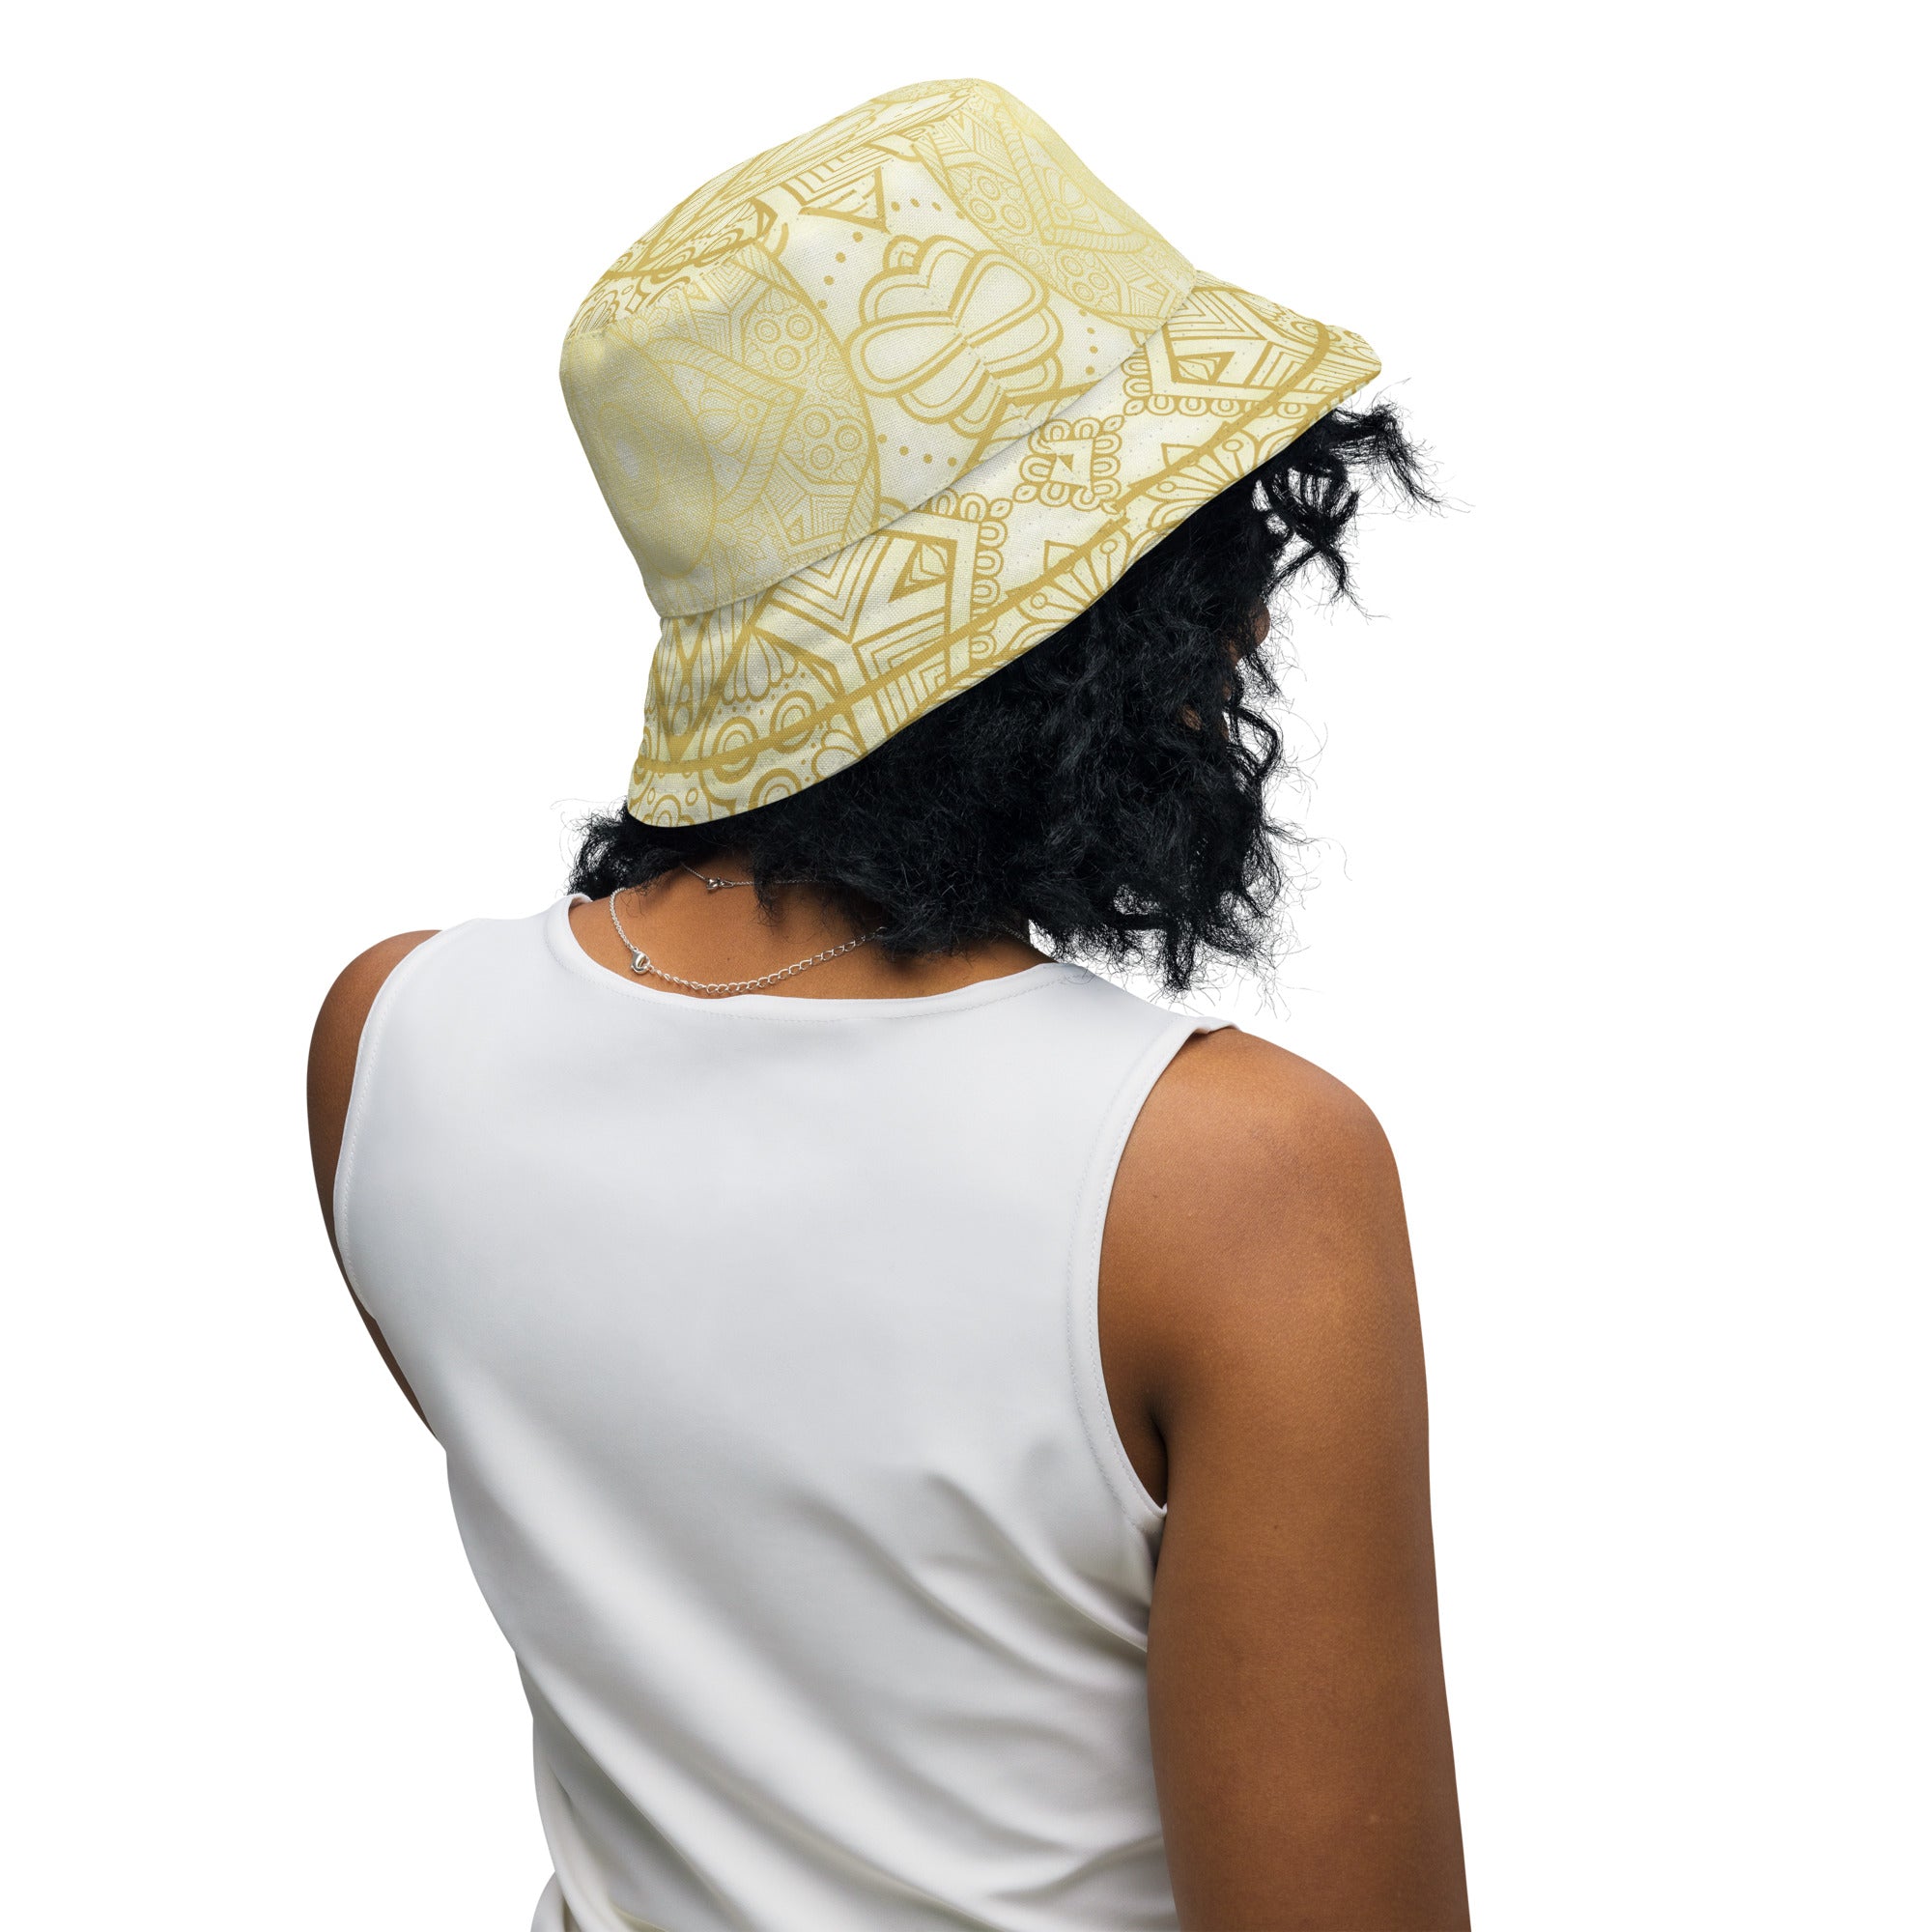 "Geo Gold Bucket Hat: Elevate Your Style with Modern Sophistication", lioness-love